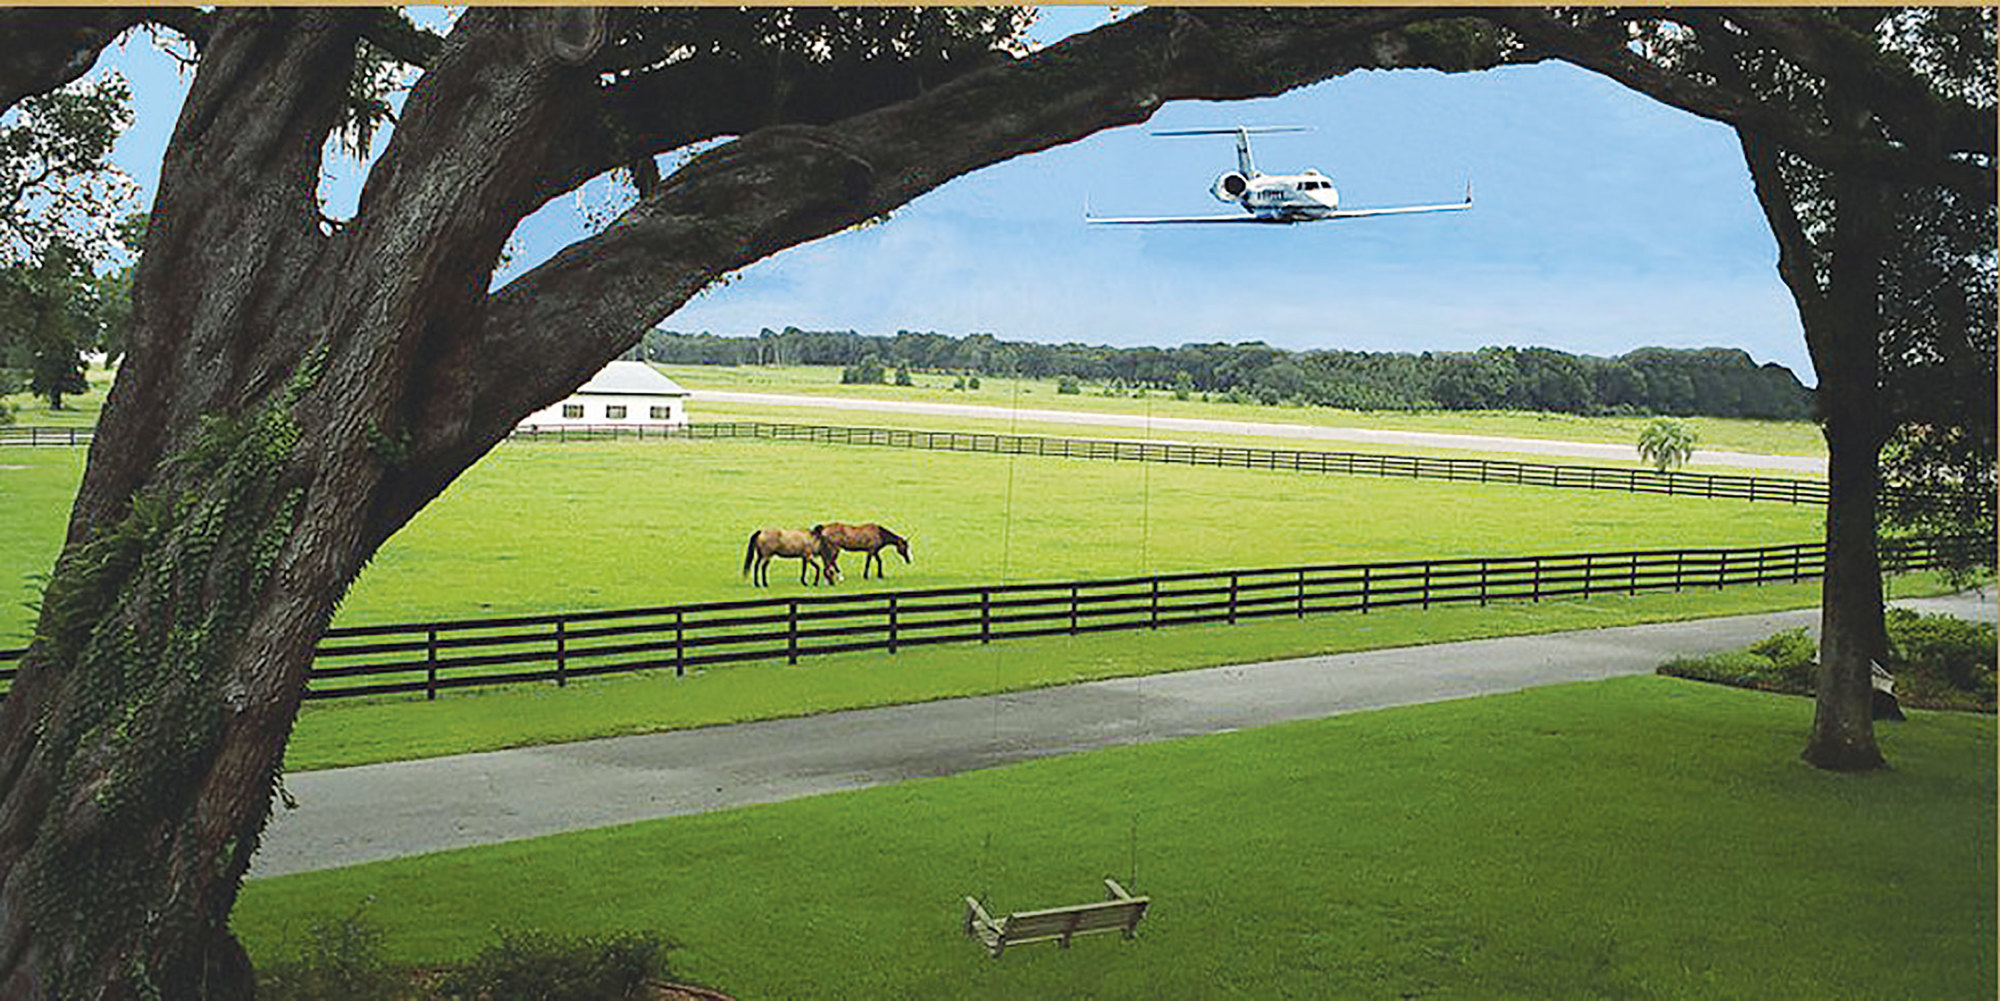 Parcels would be around 10 acres apiece so they could easily accomodate both horses and stables and a plane with a hangar.